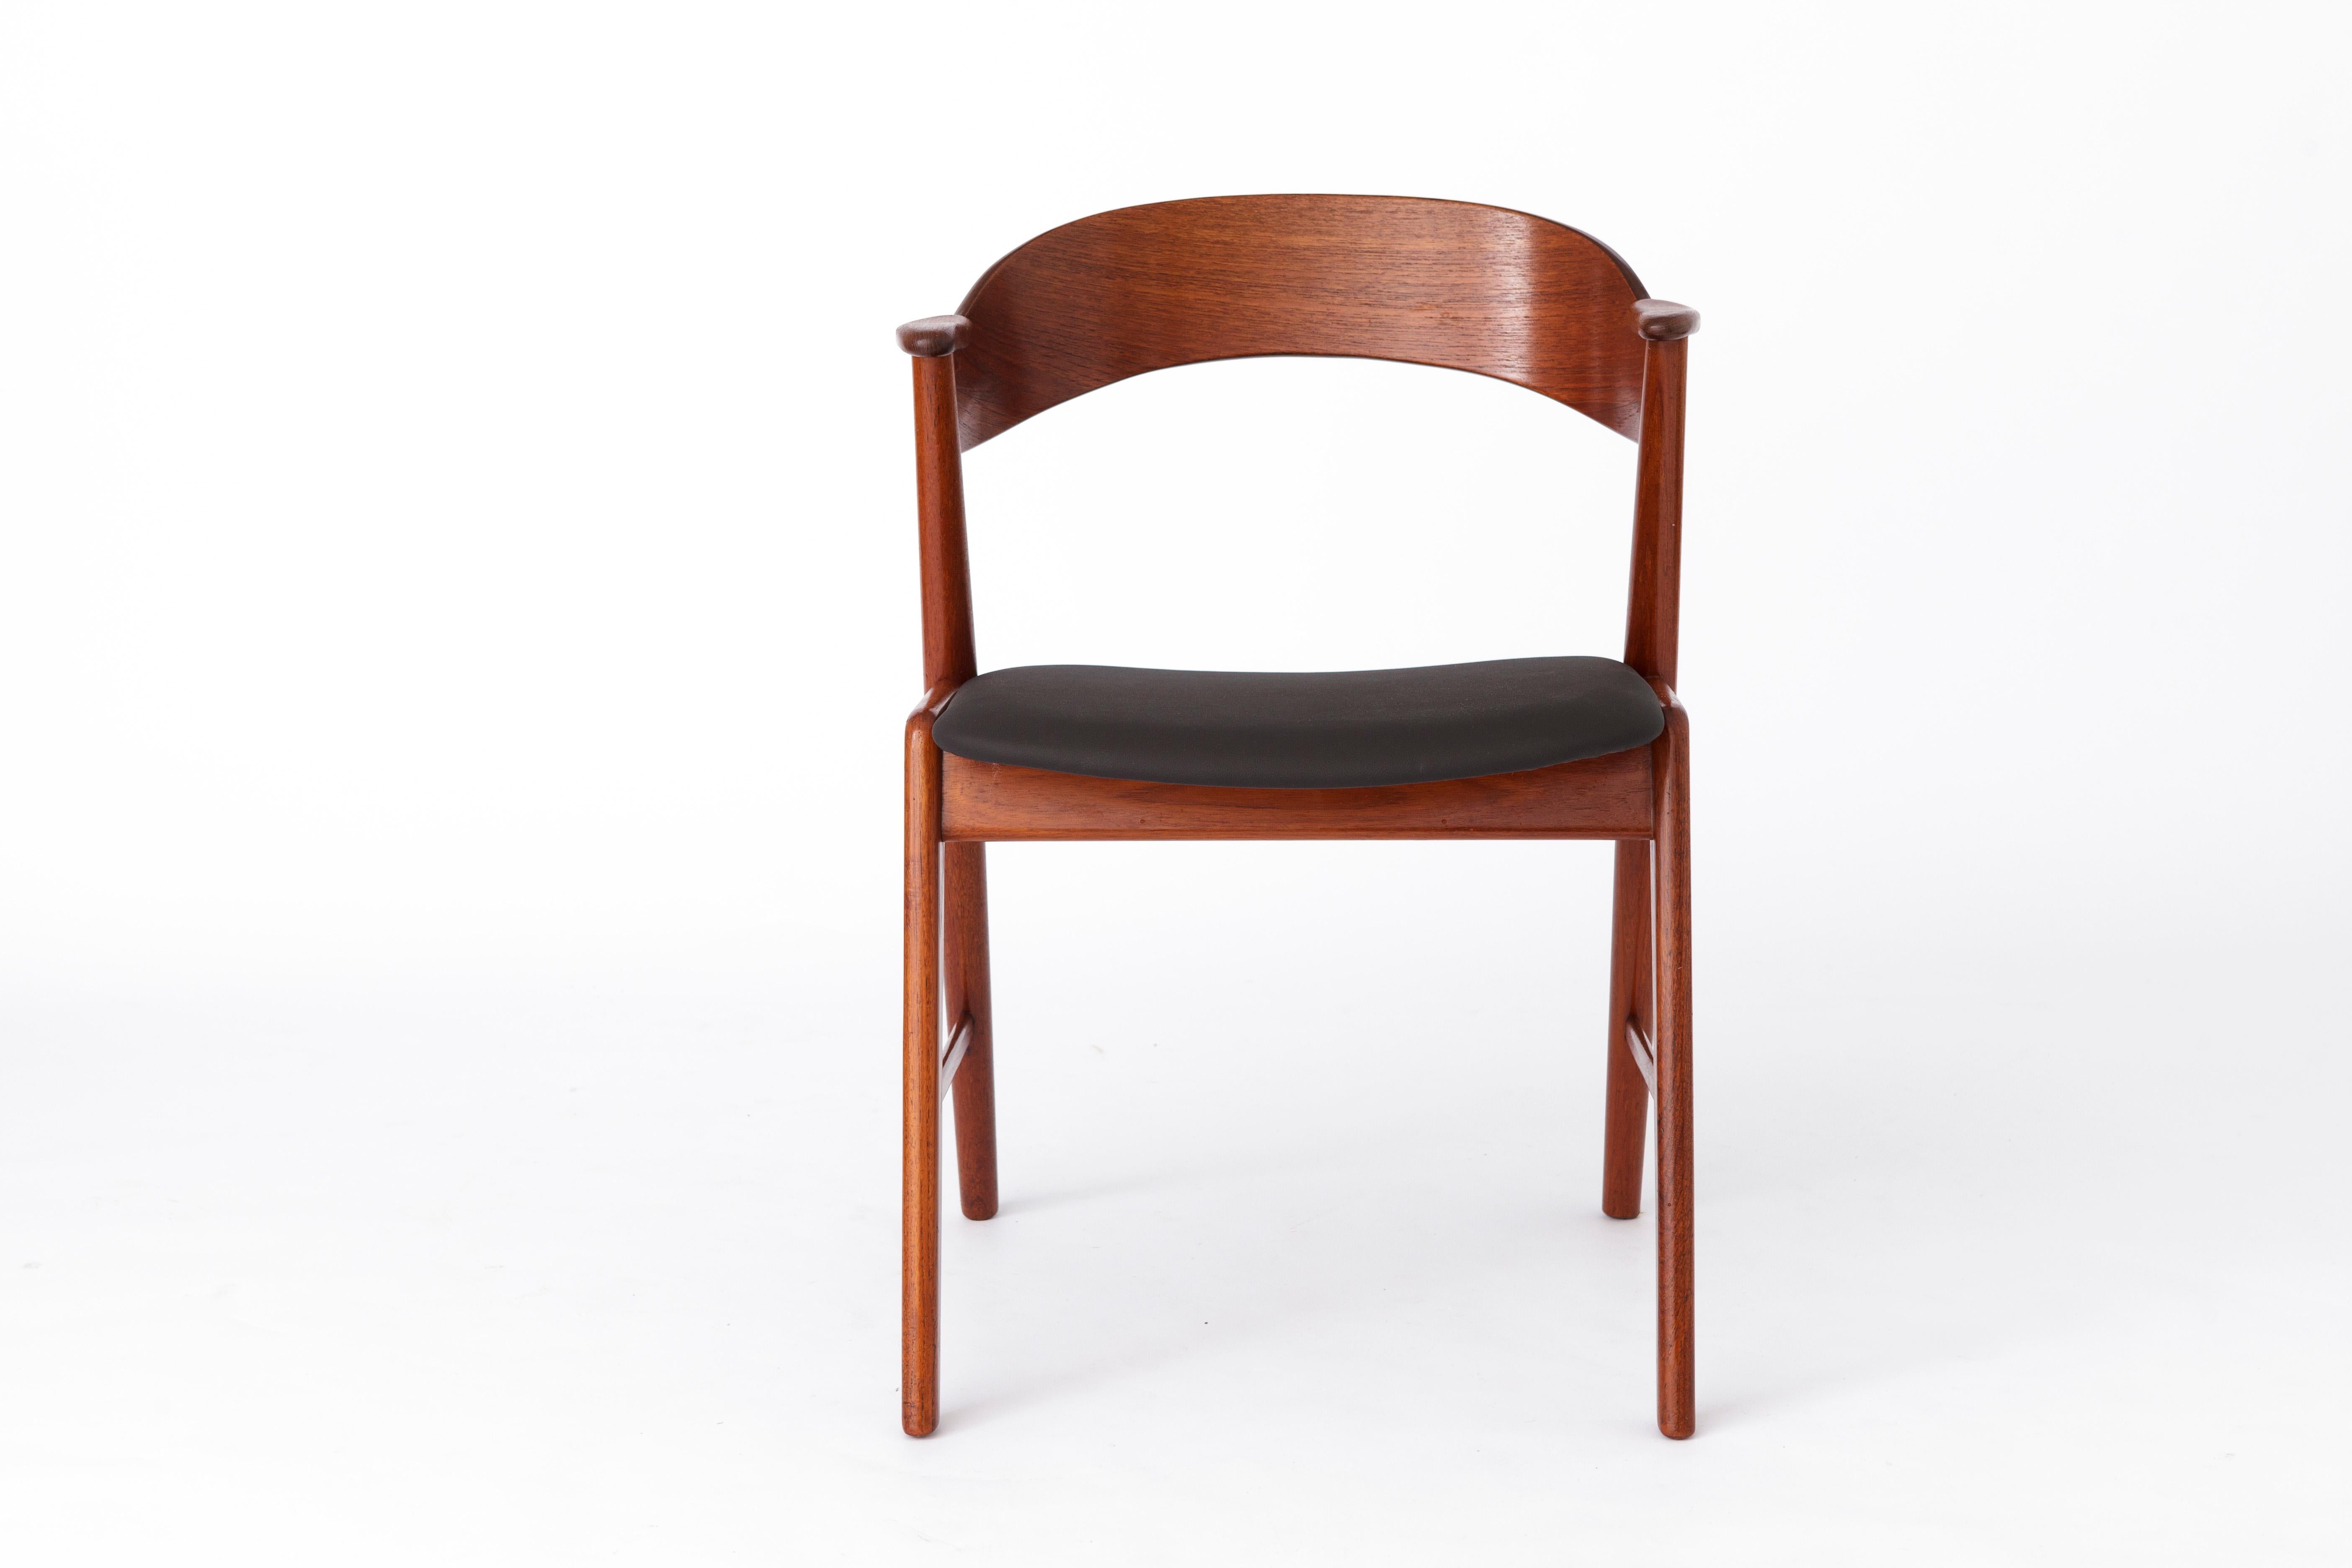 Vintage teak chair designed presumably by Henry Kjaernulf for 
manufacturer Korup Stolefabrik, Denmark in the 1960s. 
Ideal as desk or dining chair!

Sturdy teak chair frame. Refurbished and oiled. 
The seat was reupholstered with black skai